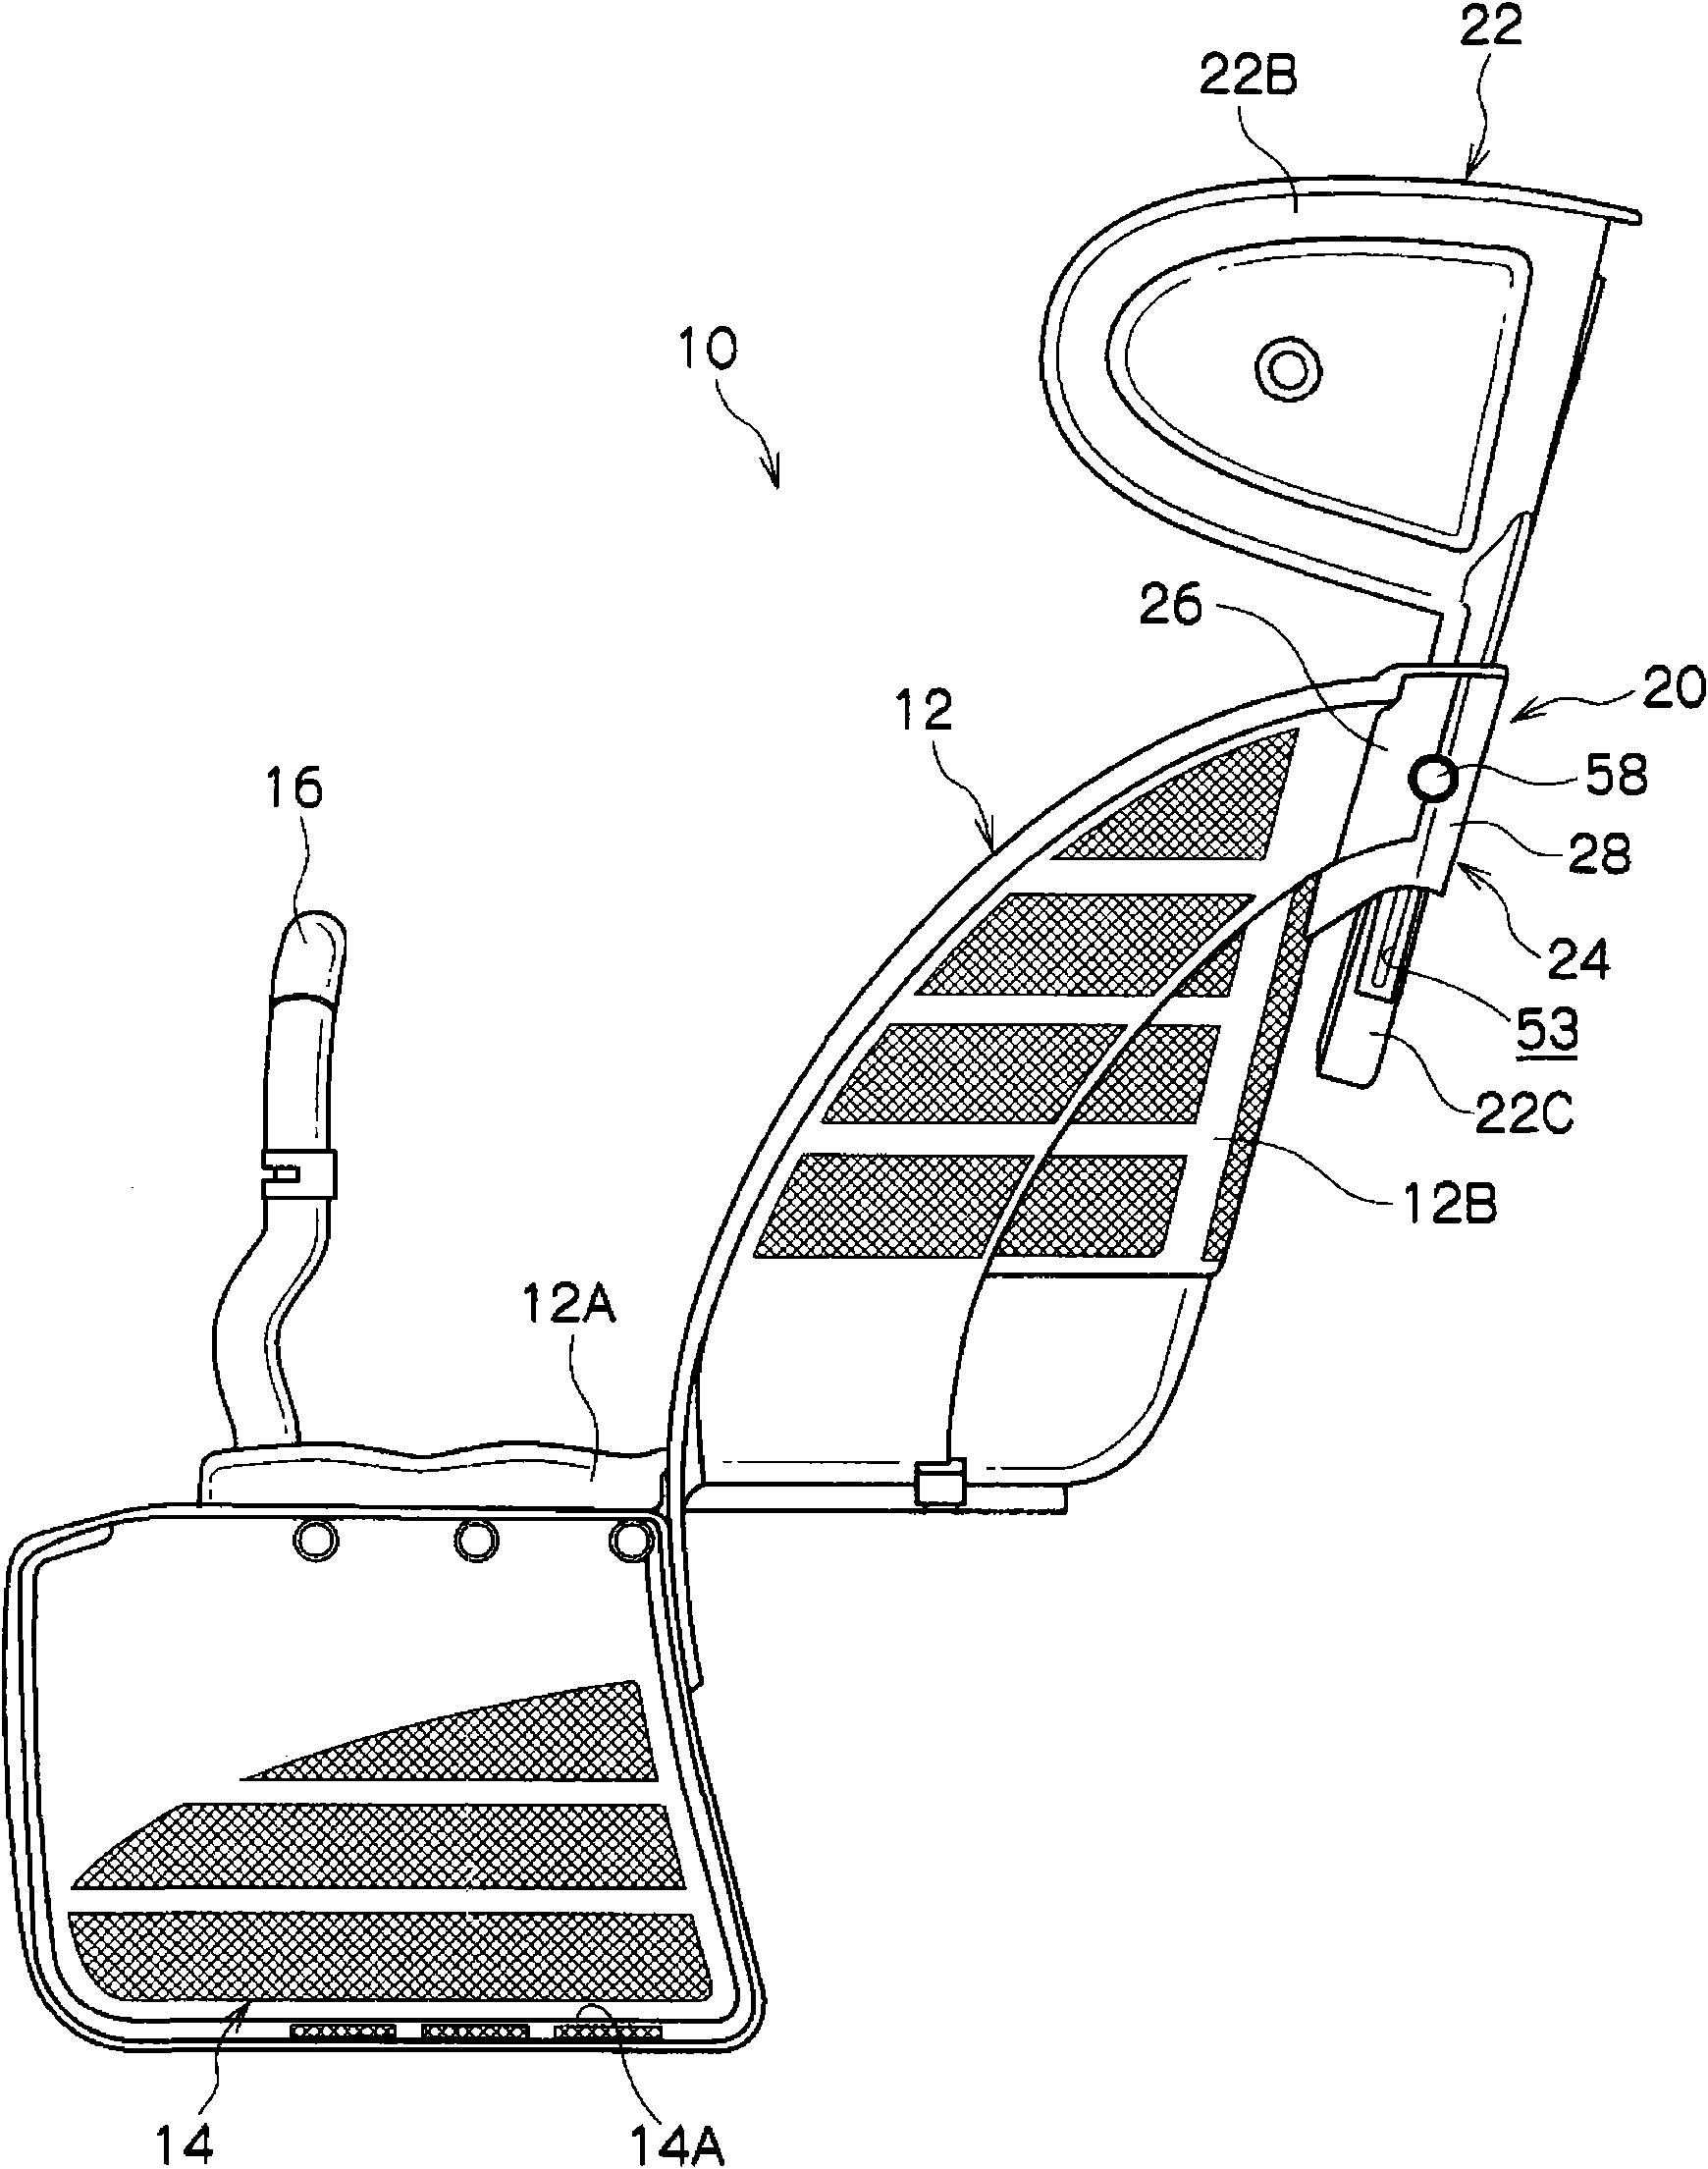 Protection top unit loading/unloading mechanism, seat device for child and two-wheel vehicle